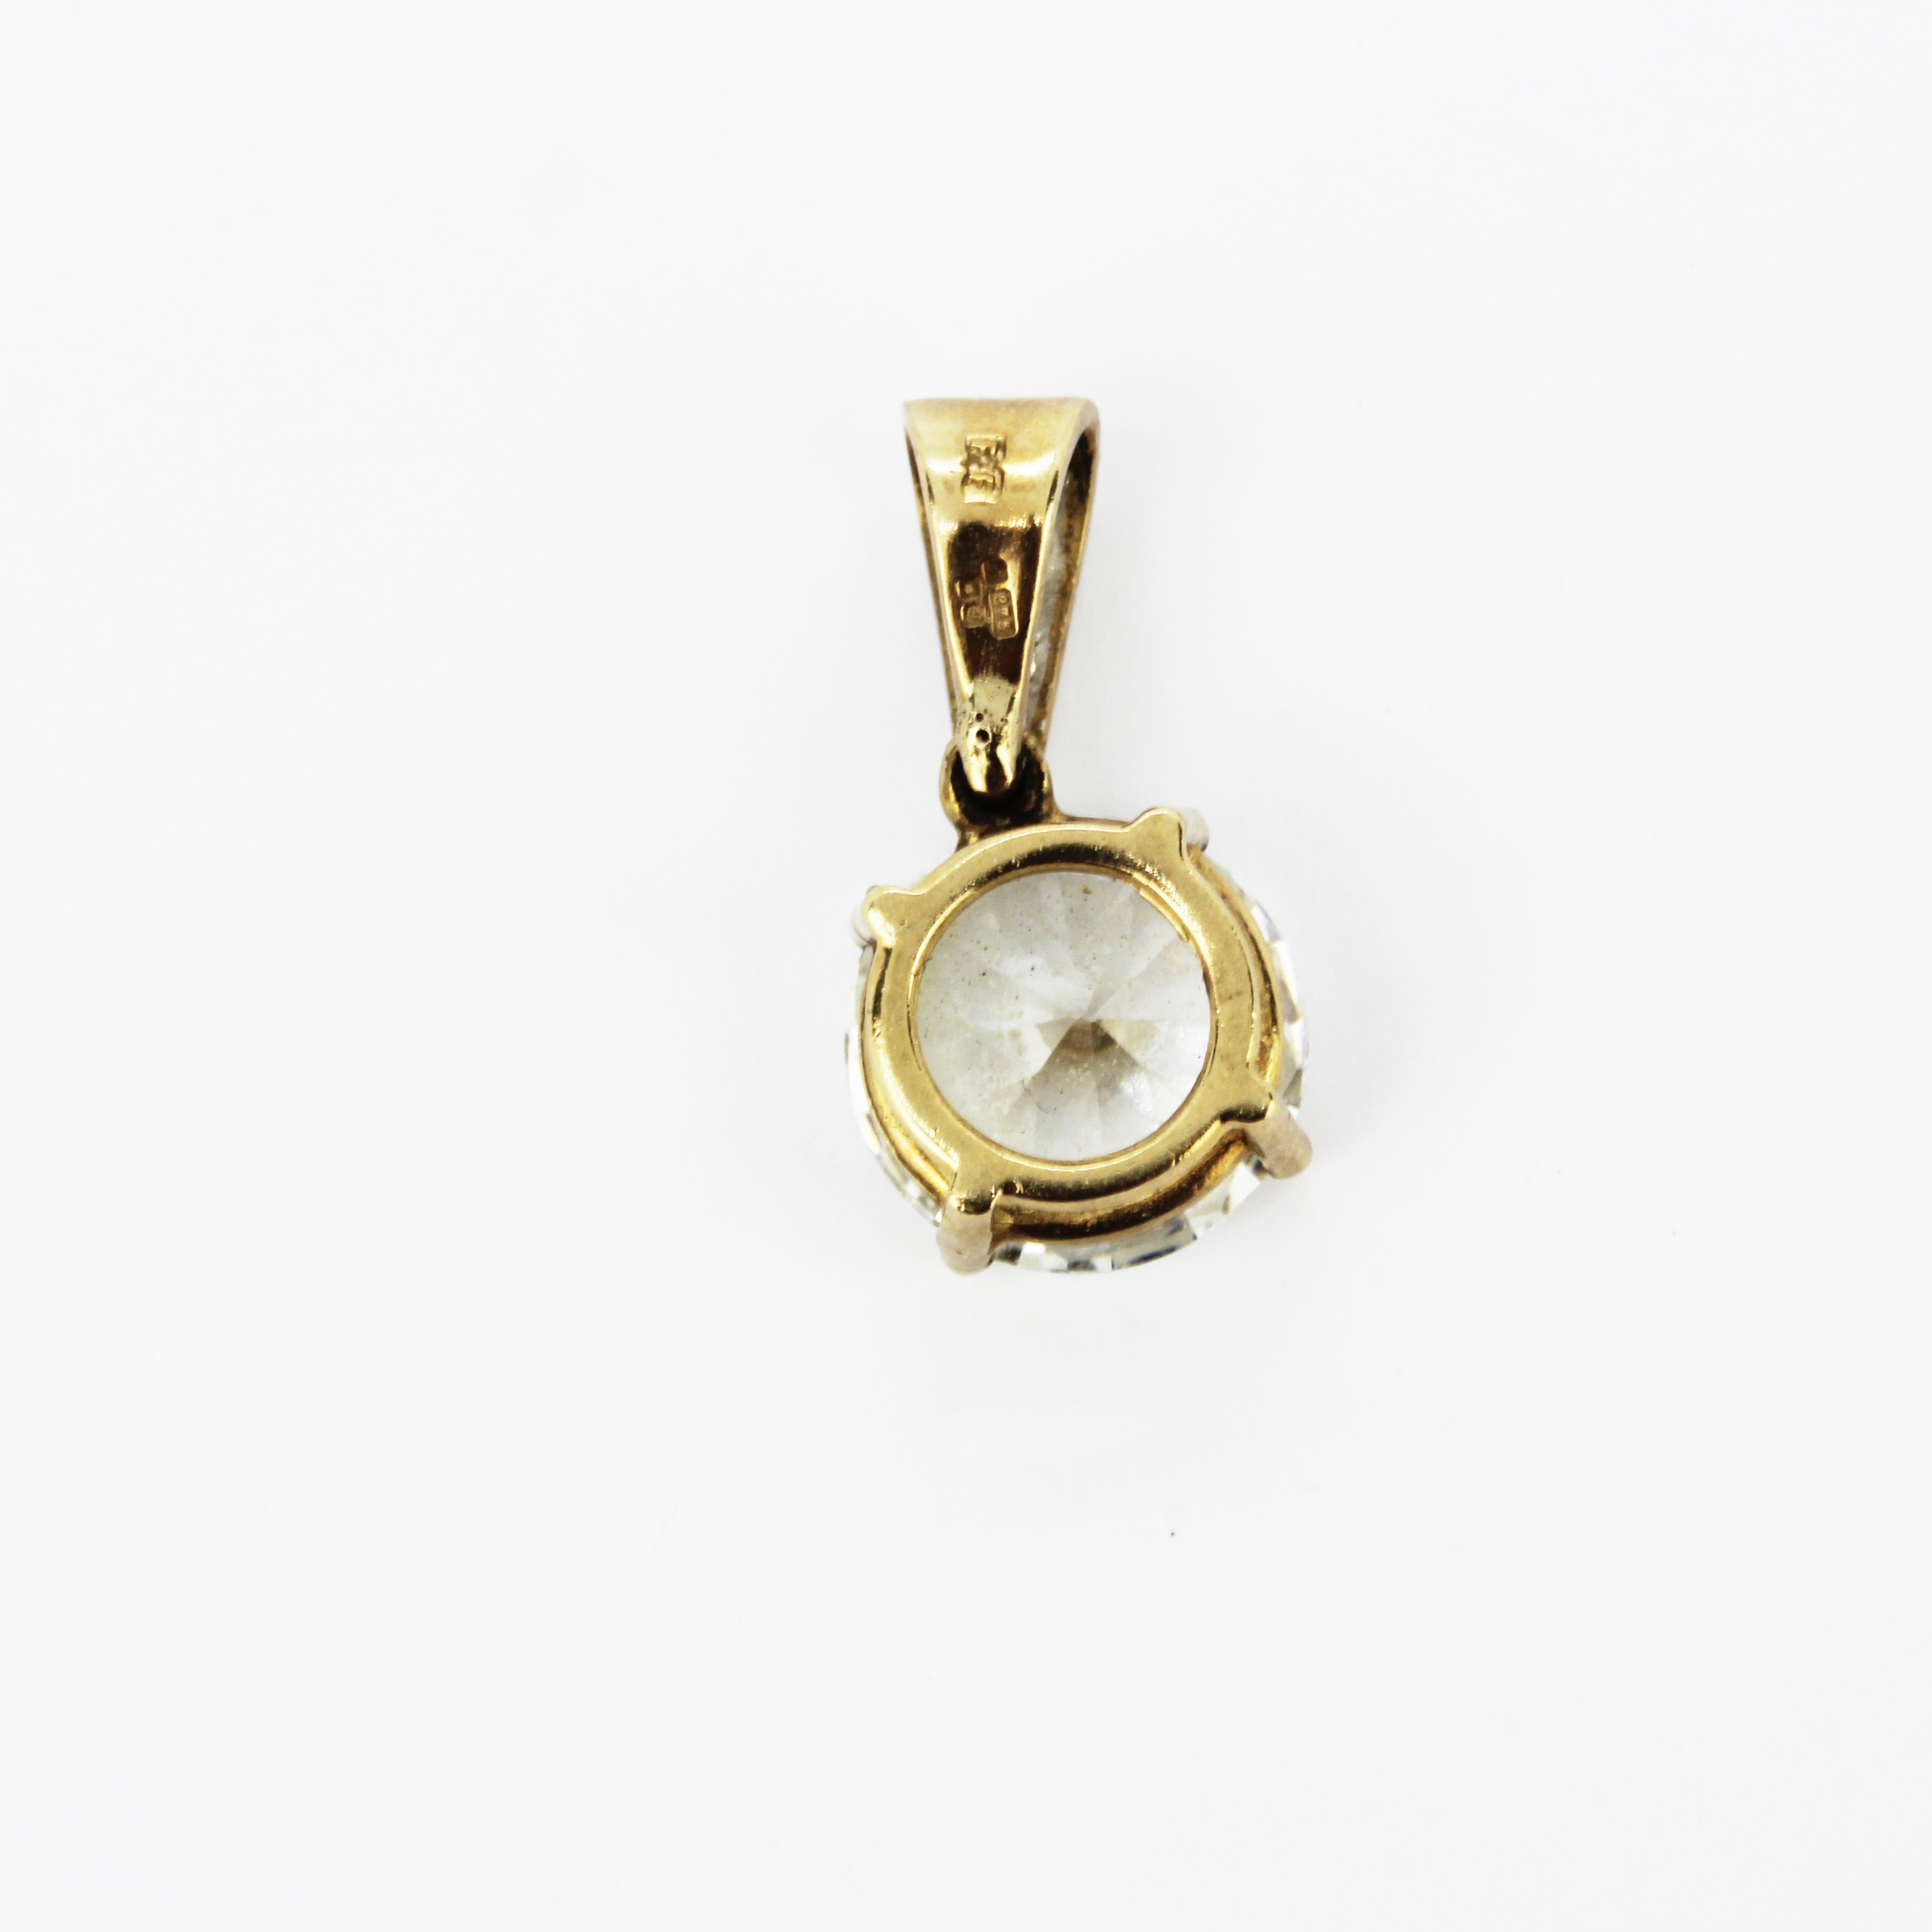 A hallmarked 9ct yellow and white gold pendant set with white stones, L. 2.4cm. - Image 2 of 3